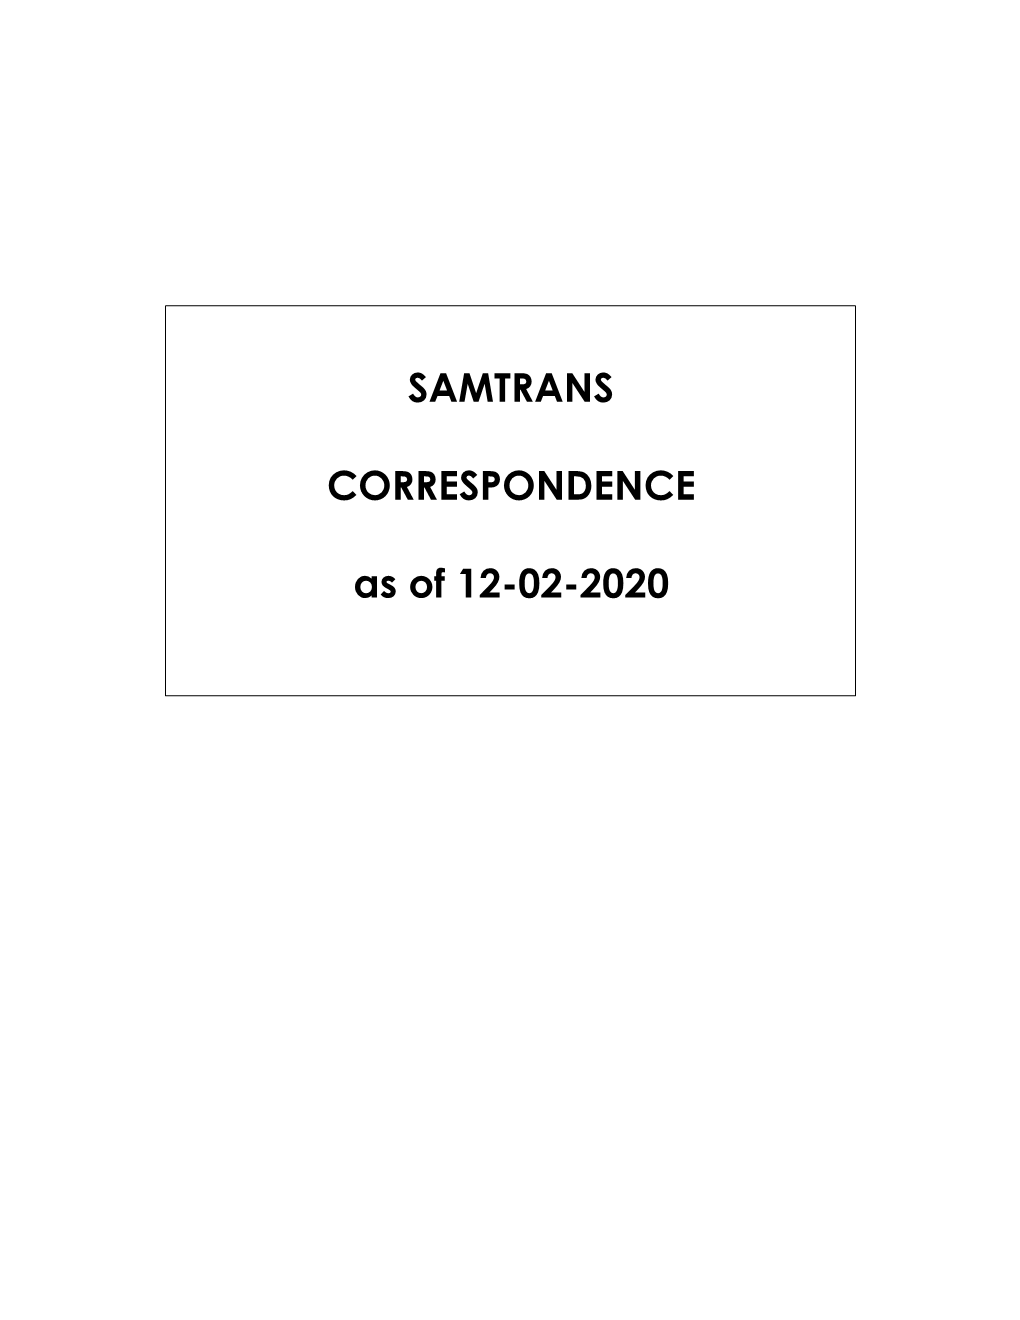 SAMTRANS CORRESPONDENCE As of 12-02-2020